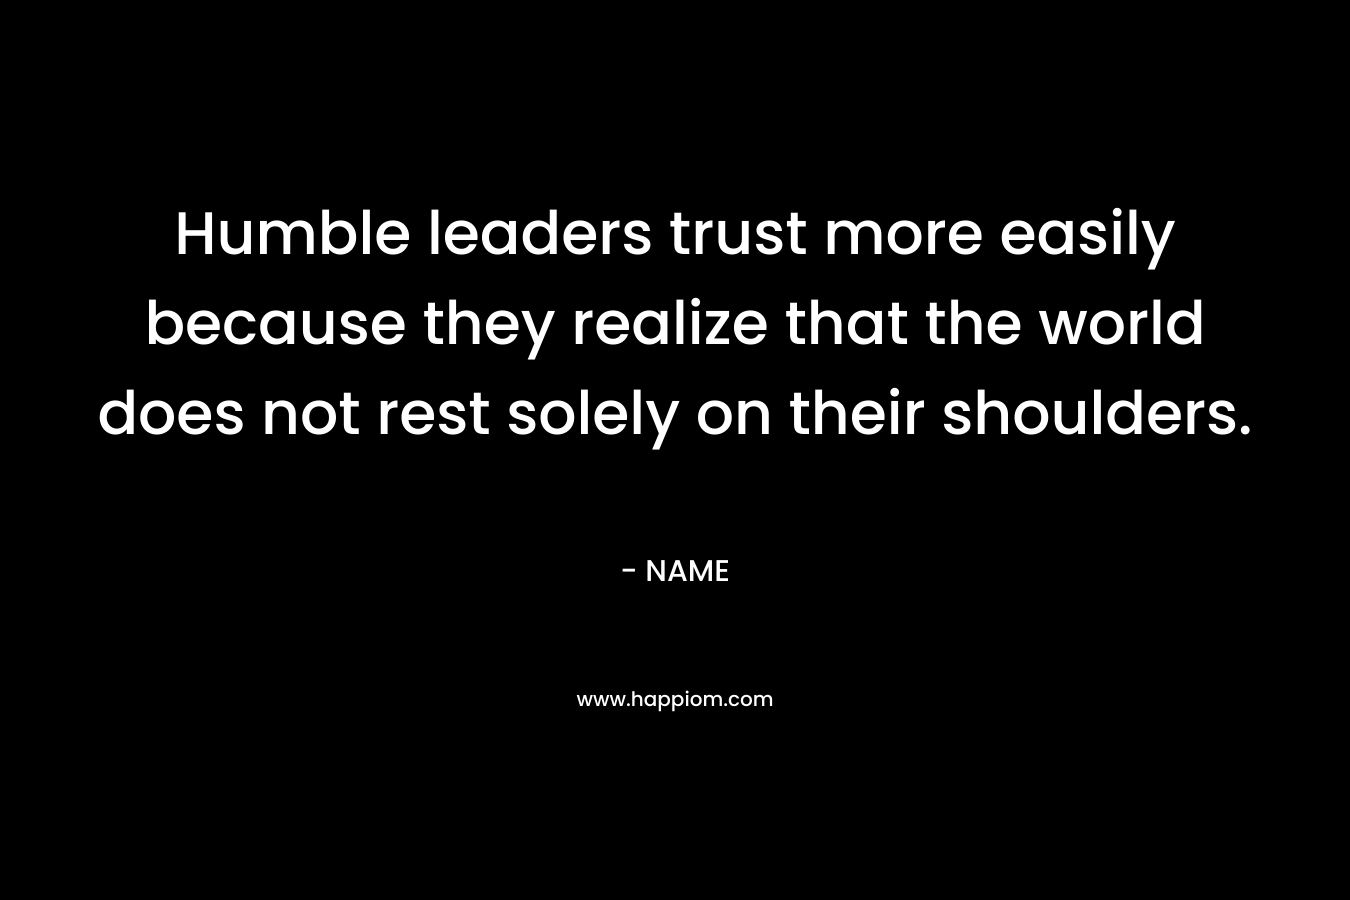 Humble leaders trust more easily because they realize that the world does not rest solely on their shoulders.